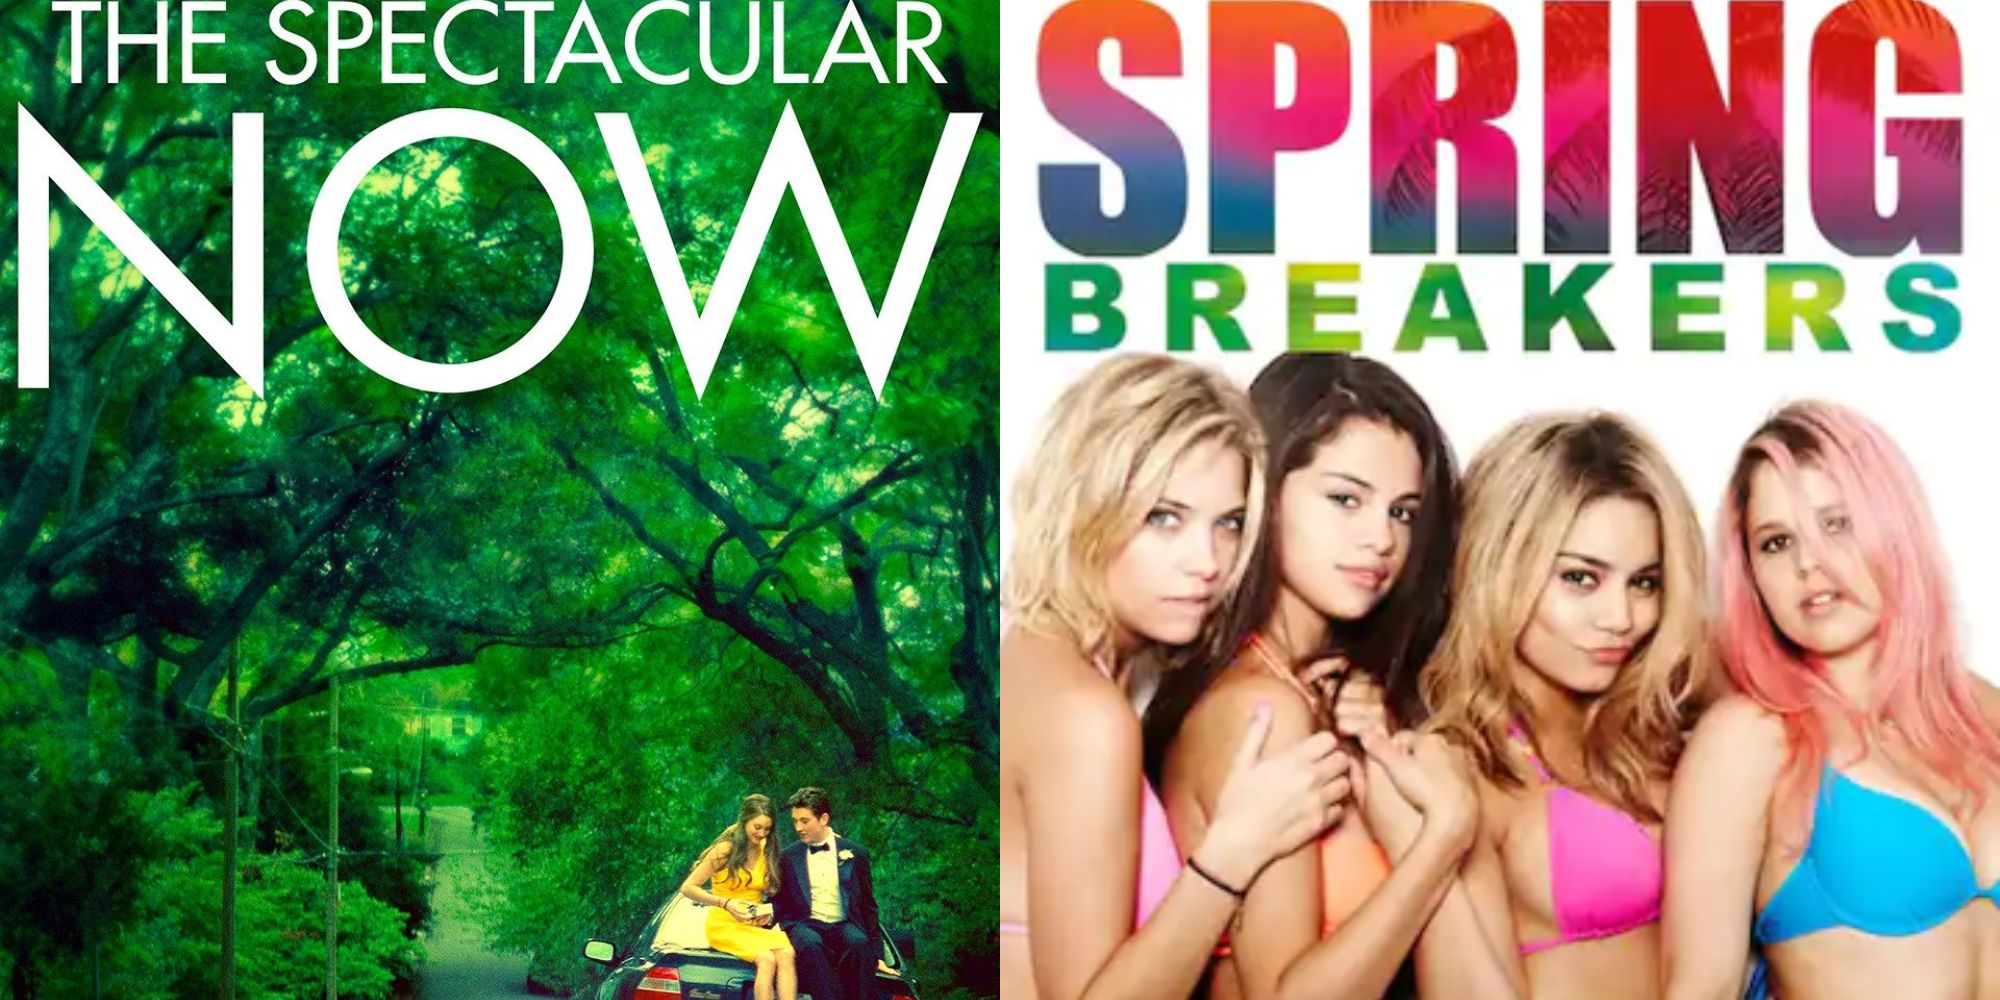 Split image showing posters for The Spectacular Now and Spring Breakers.